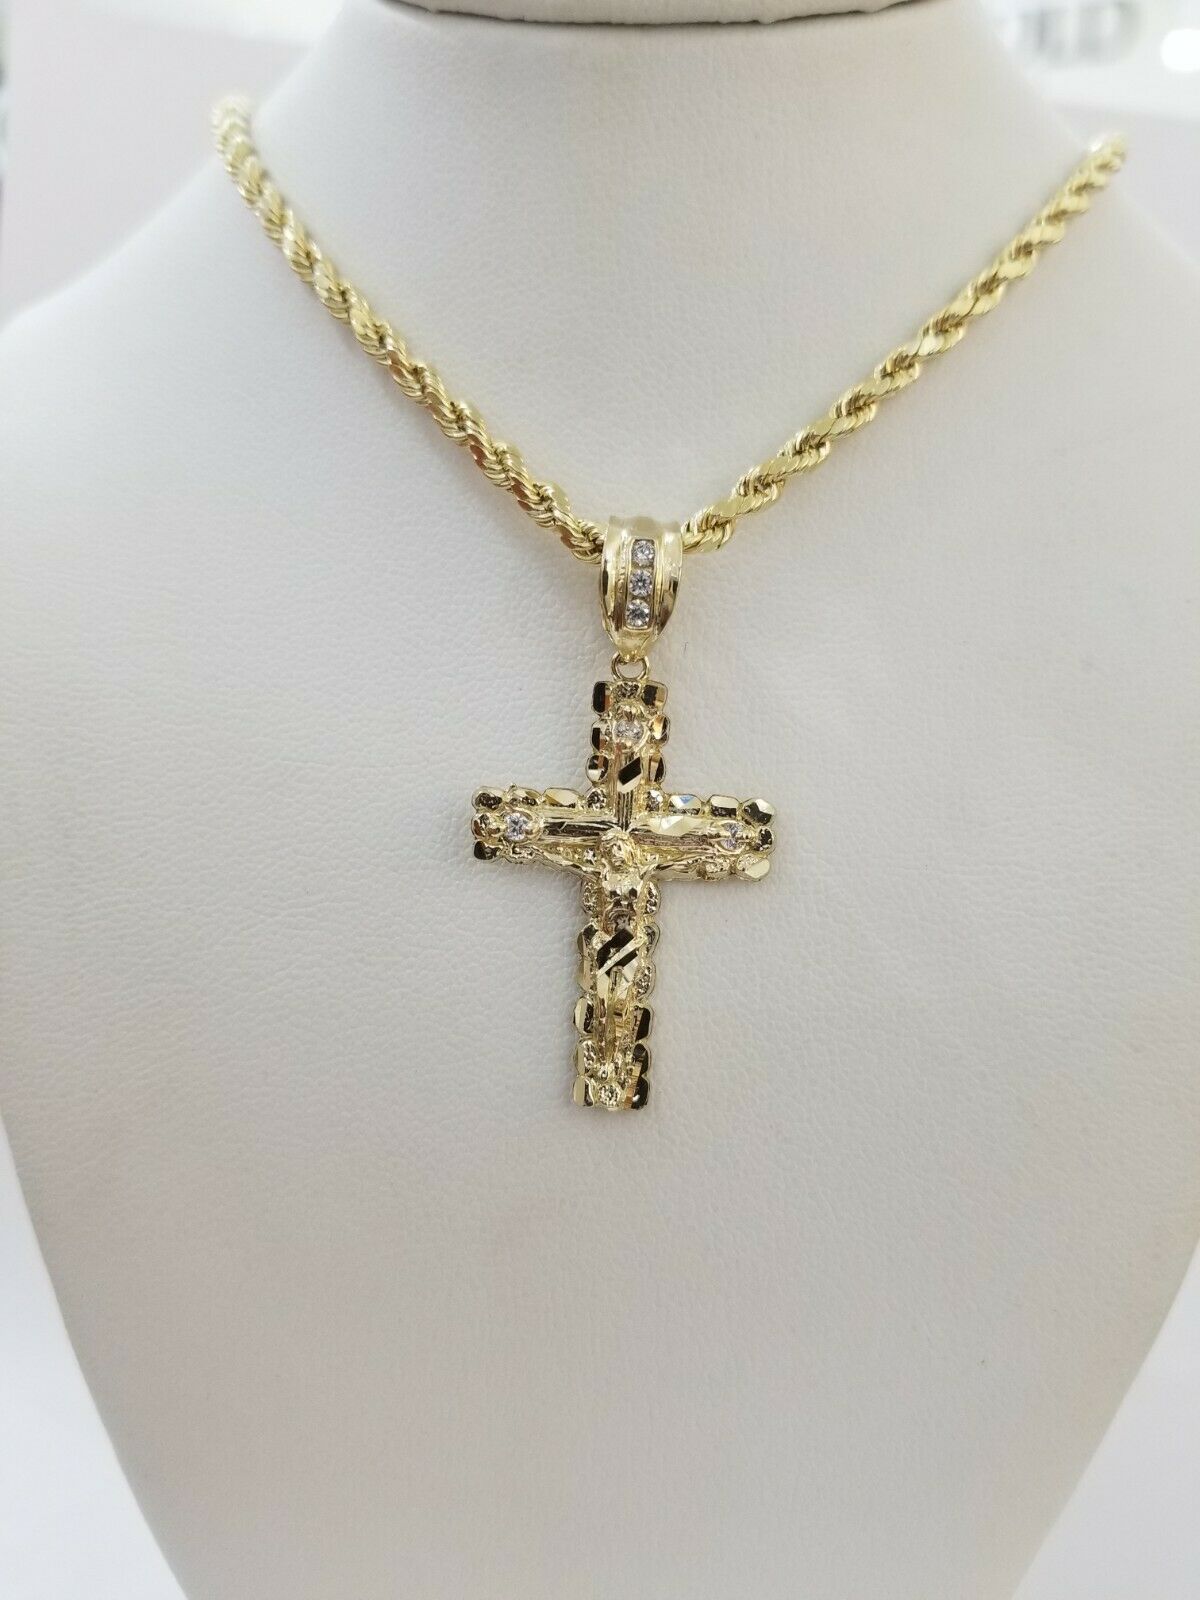 REAL 10k Rope Chain And Cross Charm Pendant 3mm Necklace Jesus Cross Set 16